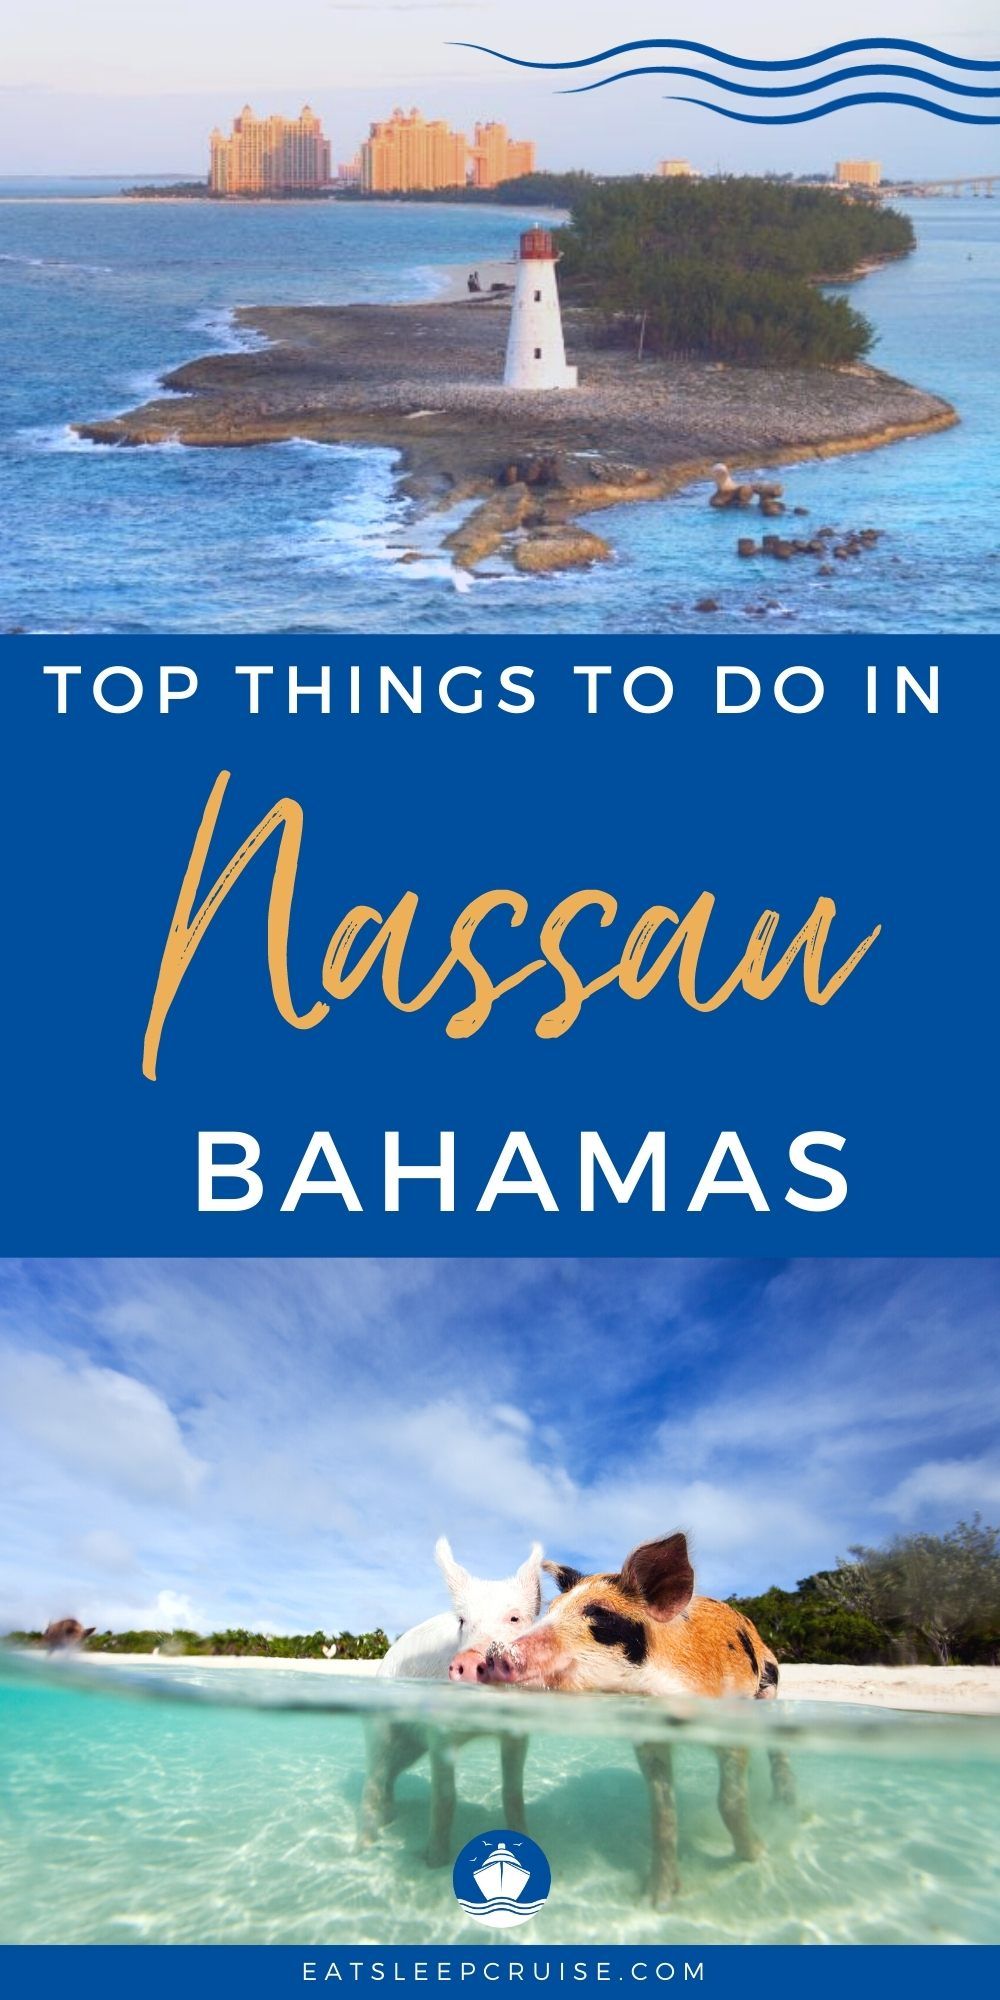 If you are visiting the Bahamas this summer, have a look at our list of the Best Things to Do in Nassau, Bahamas on a Cruise (2021).